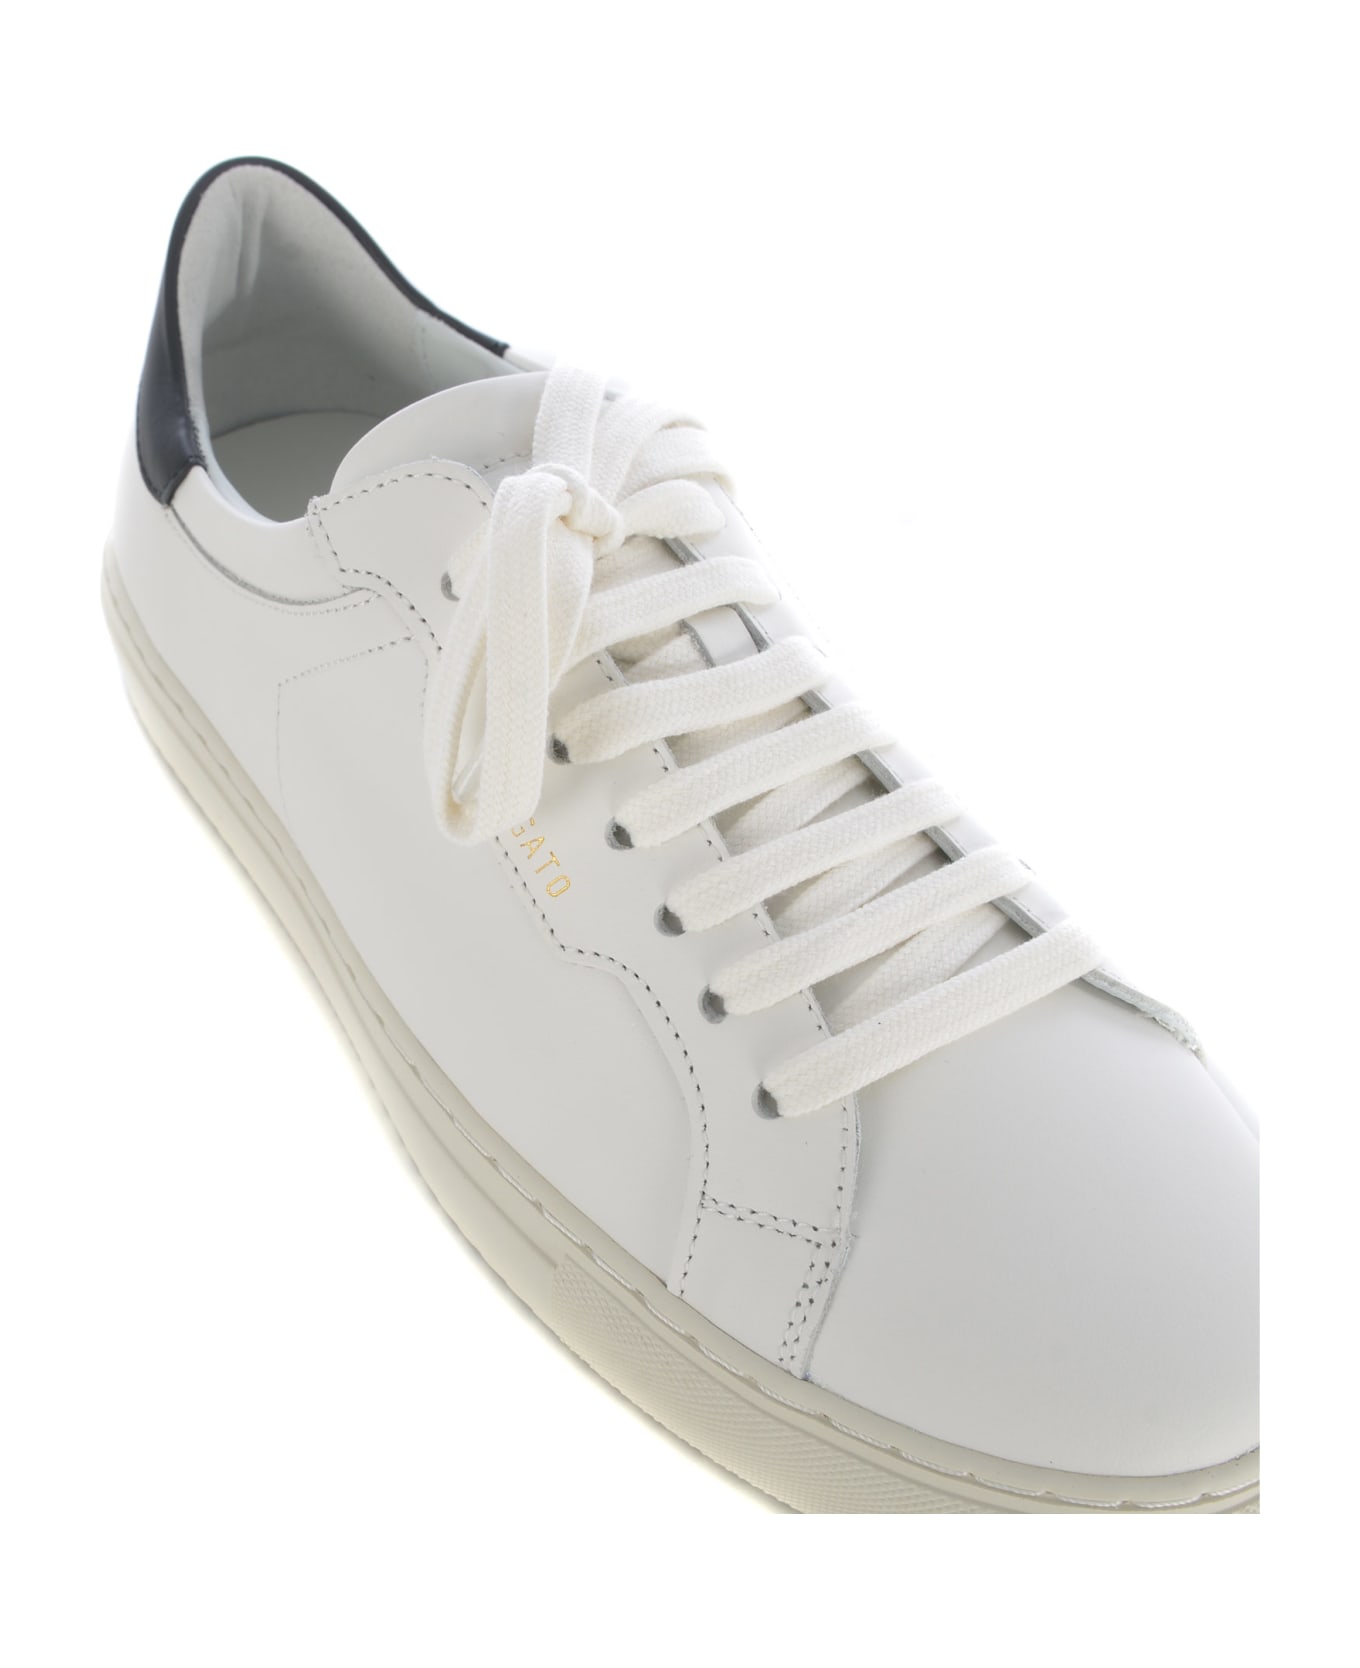 Axel Arigato Sneakers Axel Arigato "clean 180" In Leather - Bianco